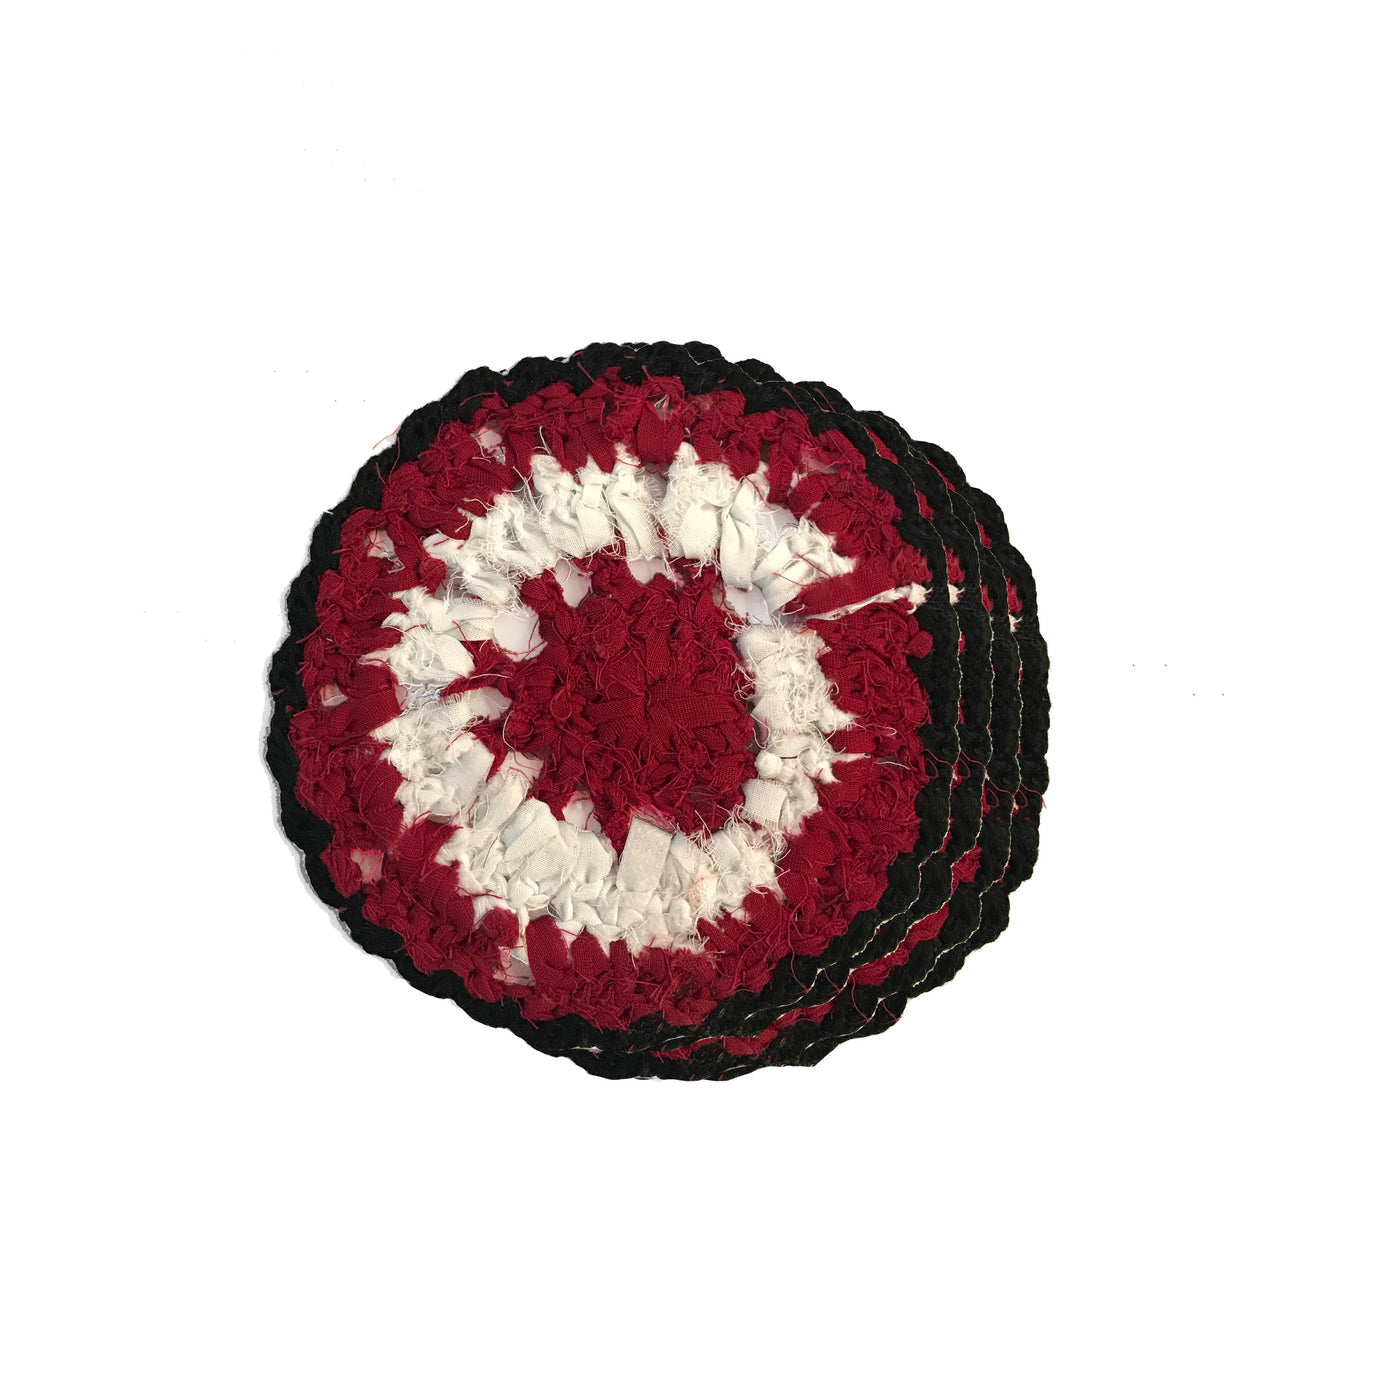 handcrafted coasters are made using the zero waste technique of crochet